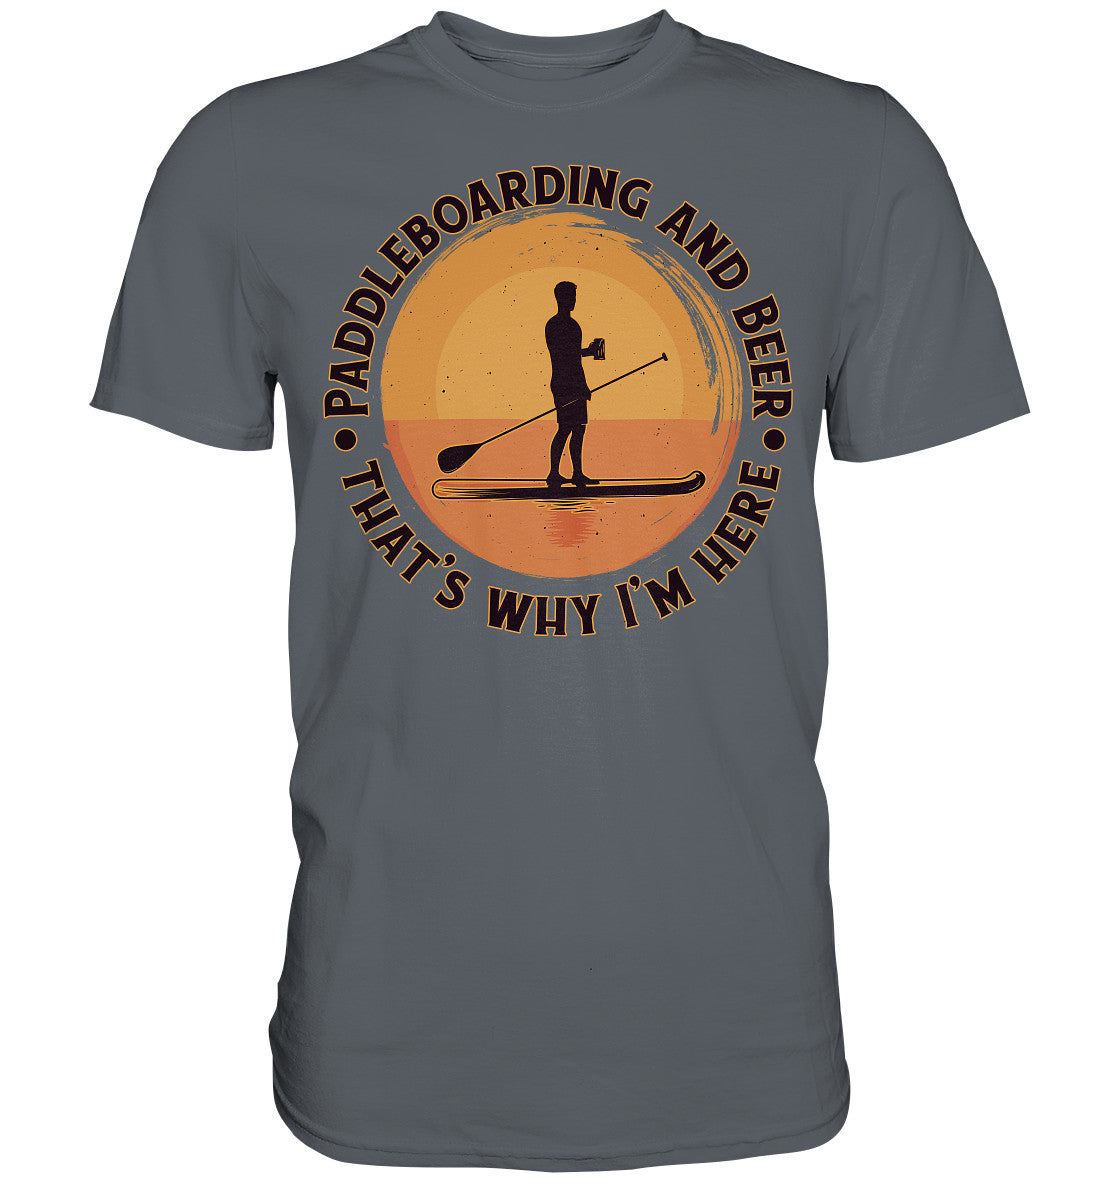 Paddleboard an Beer  - Classic Shirt